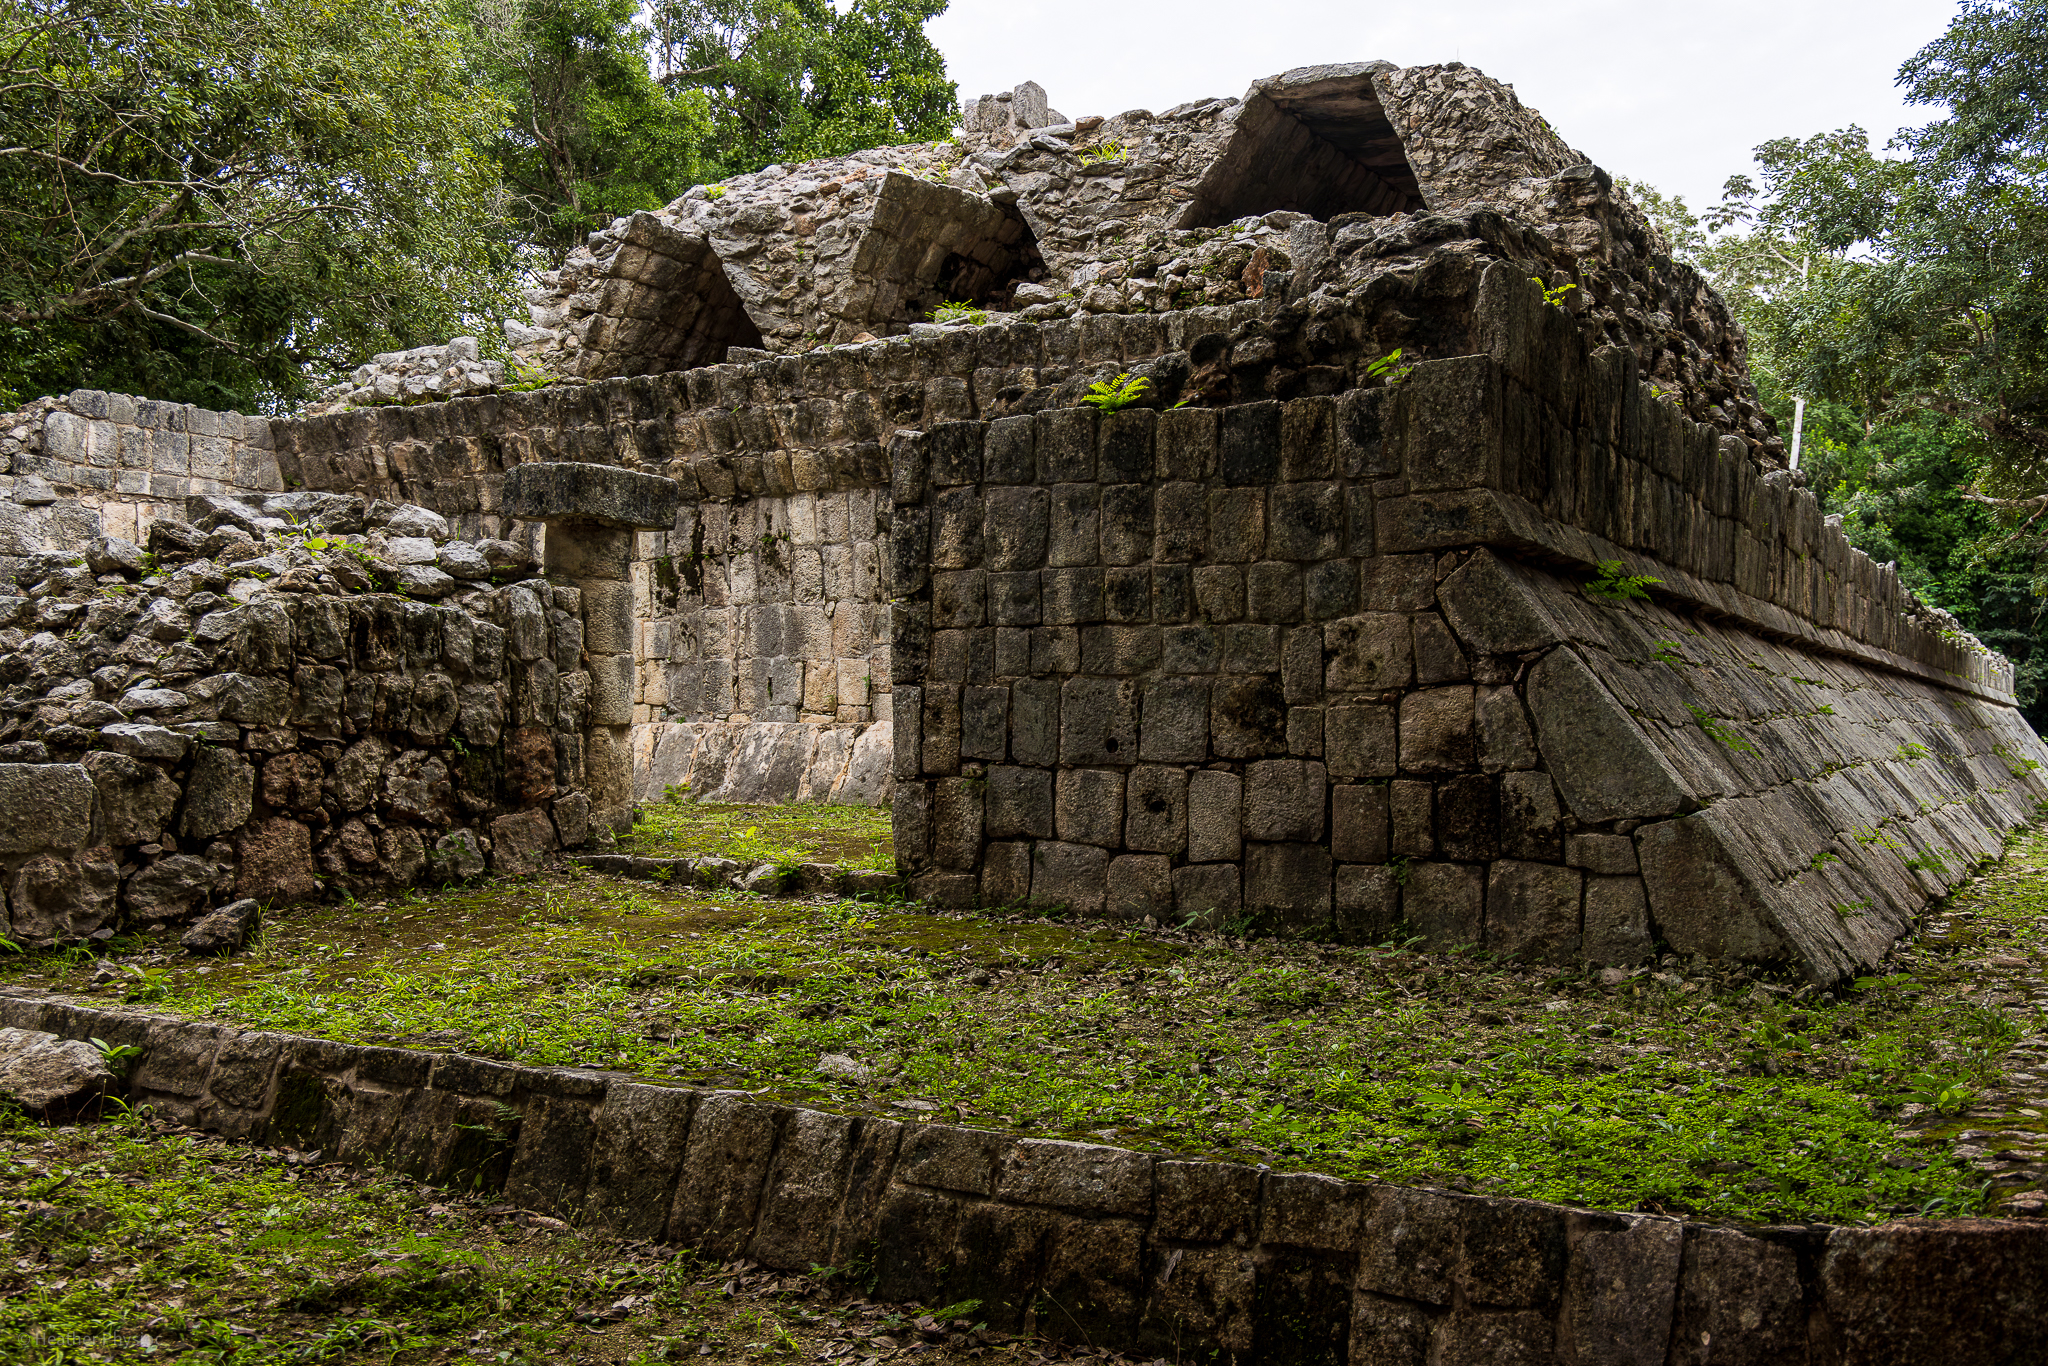 A weathered stone structure at Chichen Itza, featuring a stairway leading up to a partially collapsed temple. The ruins are surrounded by lush greenery, and small plants have begun to grow within the crevices of the stone, highlighting the passage of time and nature's reclaiming of the site.